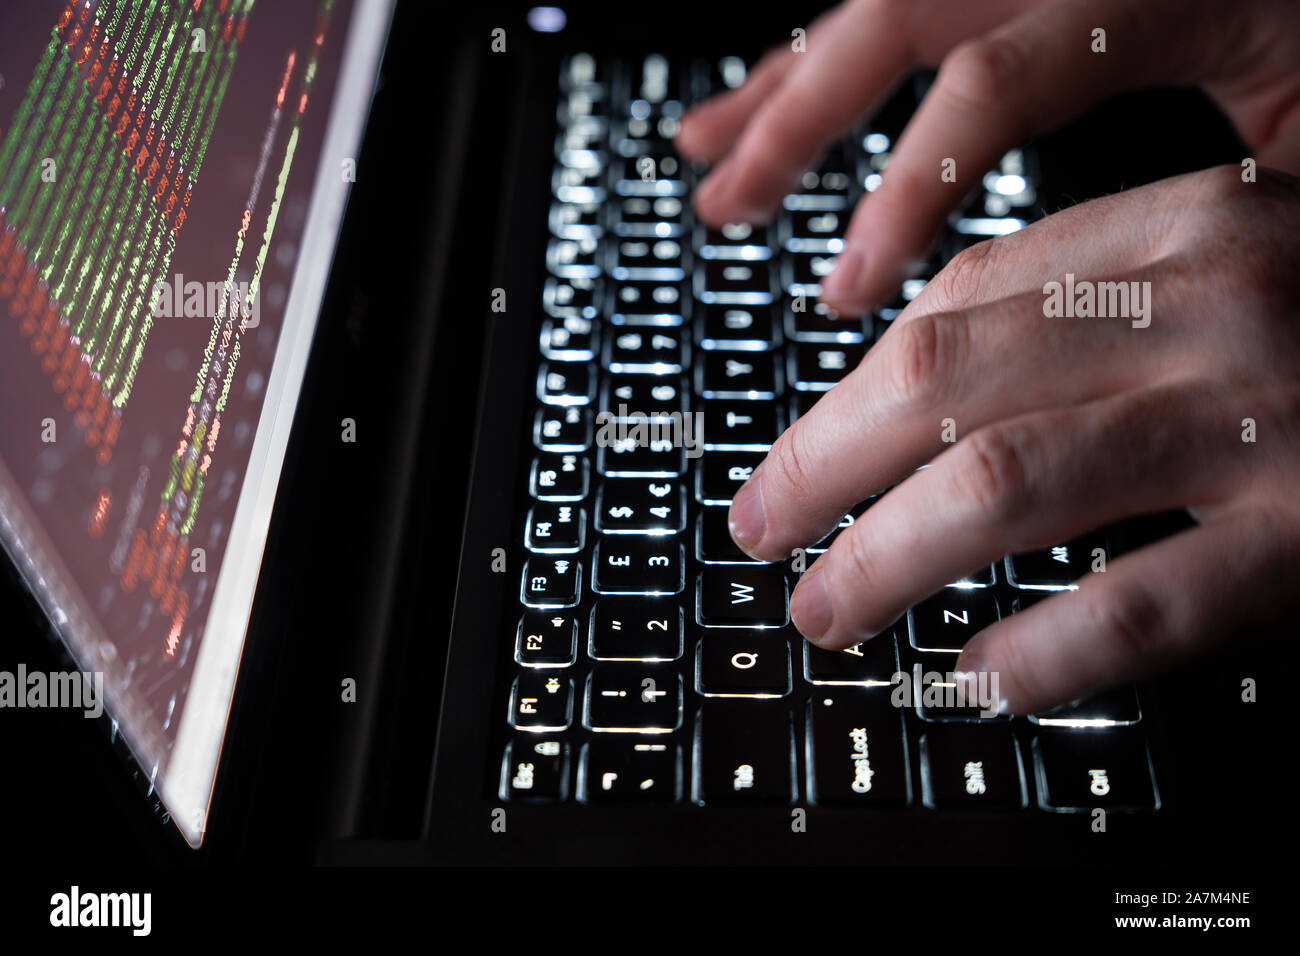 Typing on a computer keyboard - concept cybersecurity, phishing, hacking, social engineering attack, dark web, viruses and trojans Stock Photo